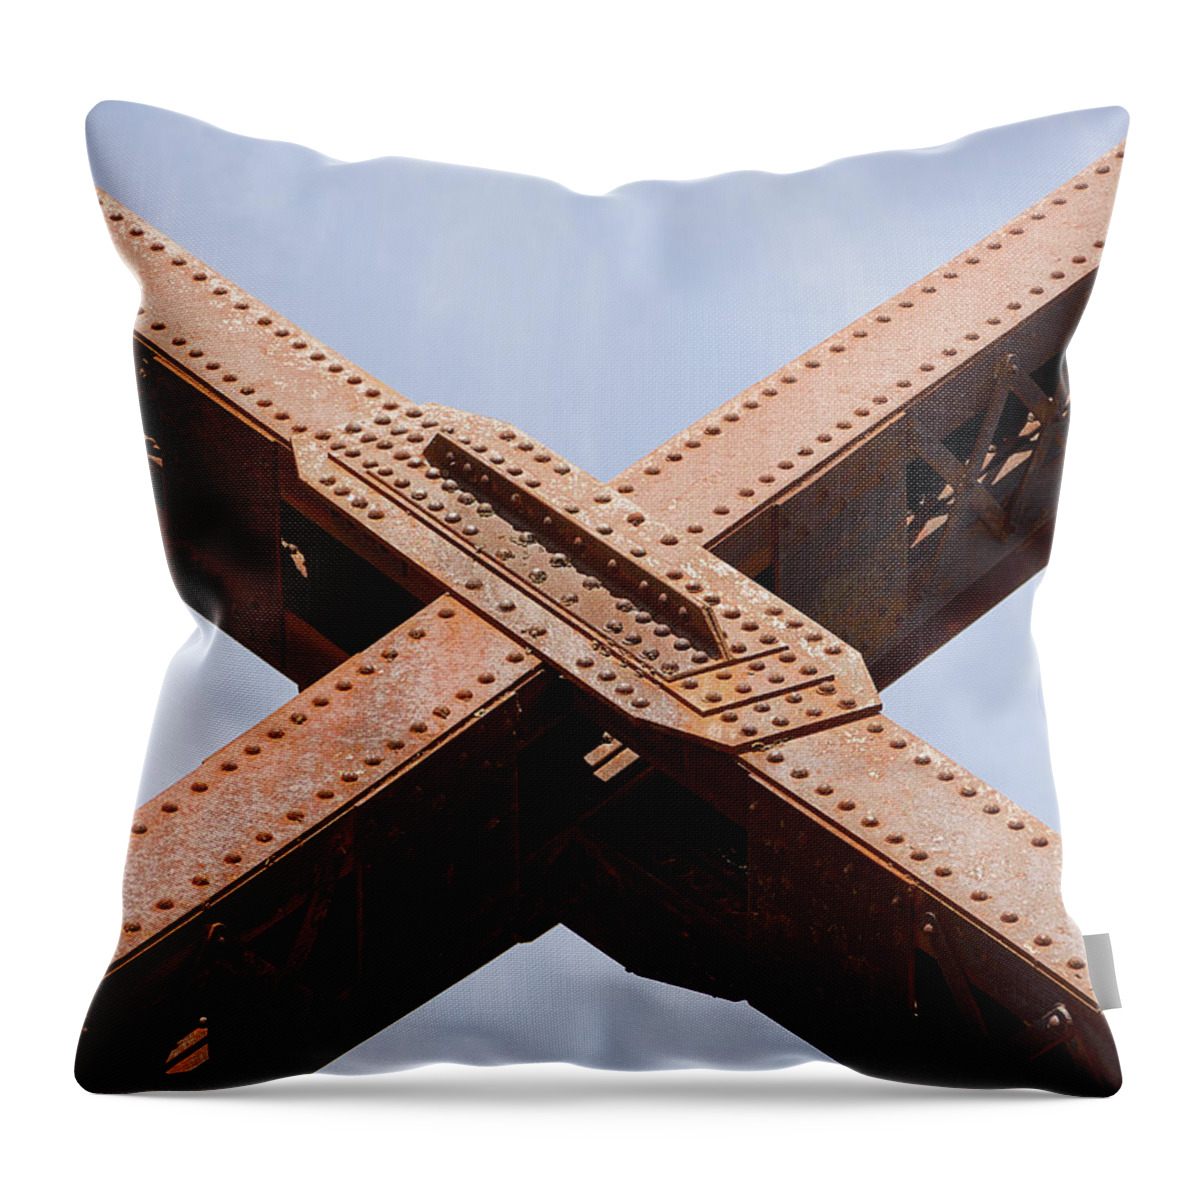 Richard Reeve Throw Pillow featuring the photograph Iron Kiss by Richard Reeve